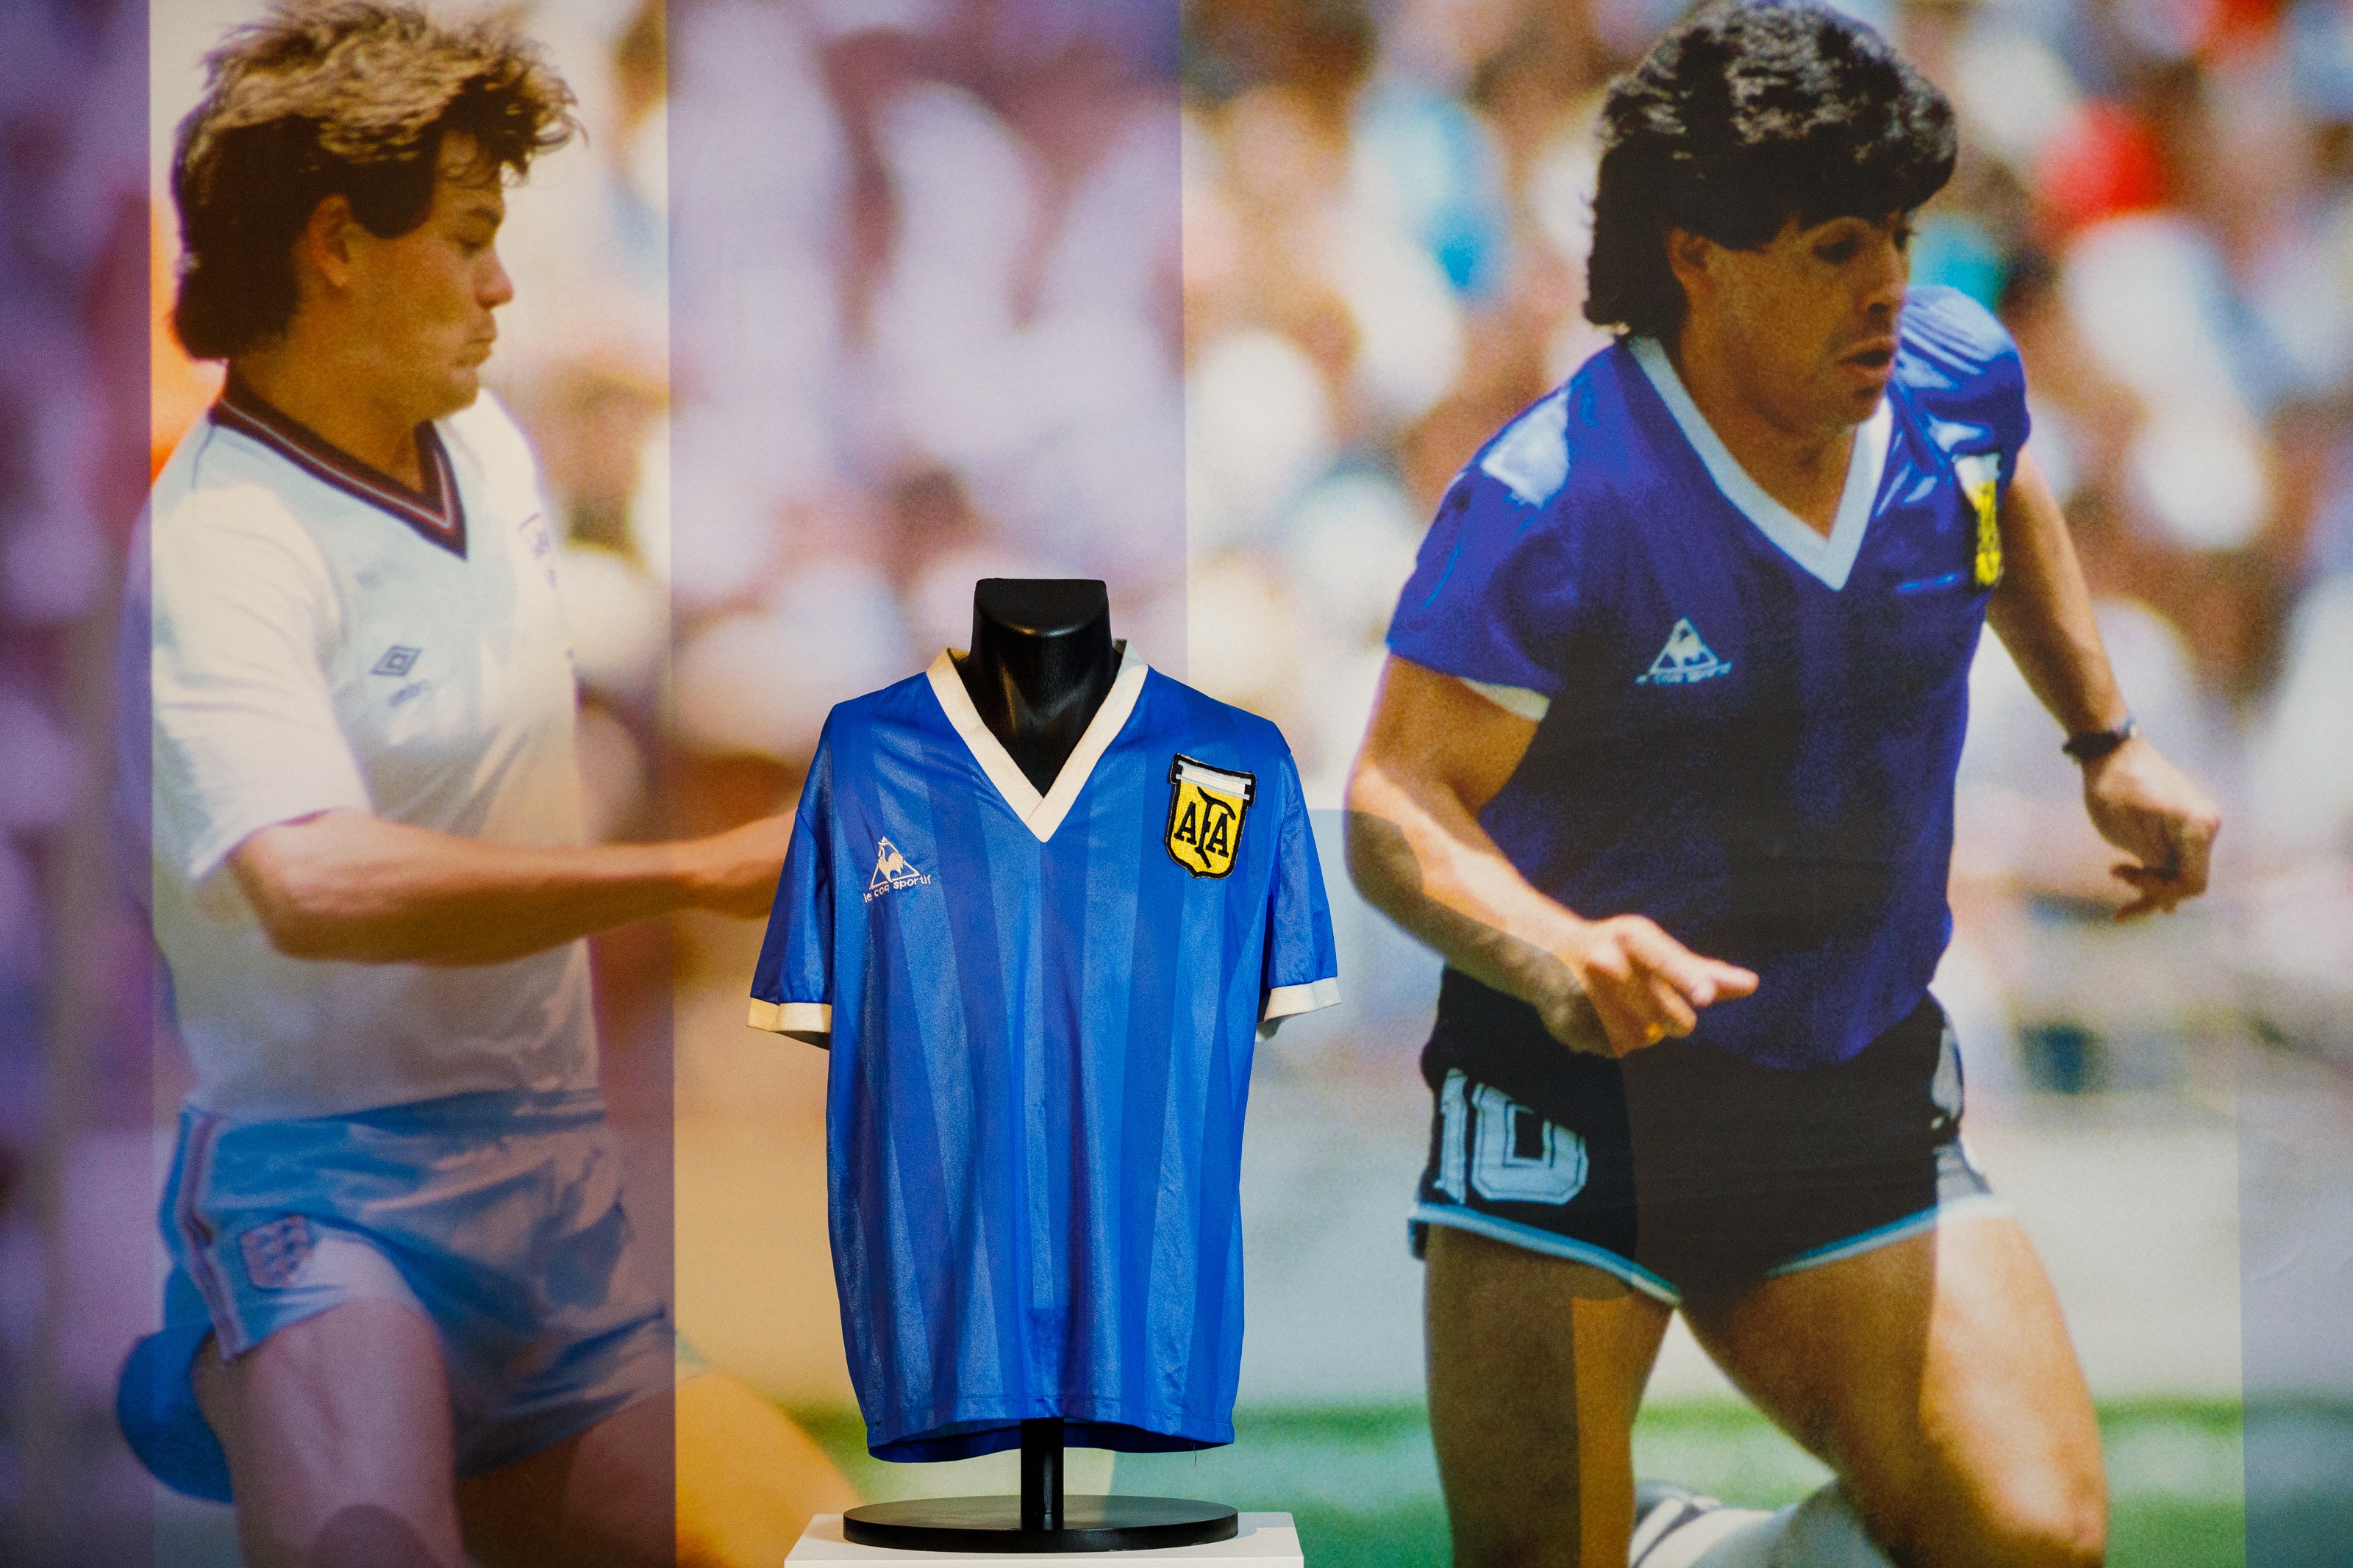 Diego Maradona’s iconic shirt is up for sale at Sotheby’s